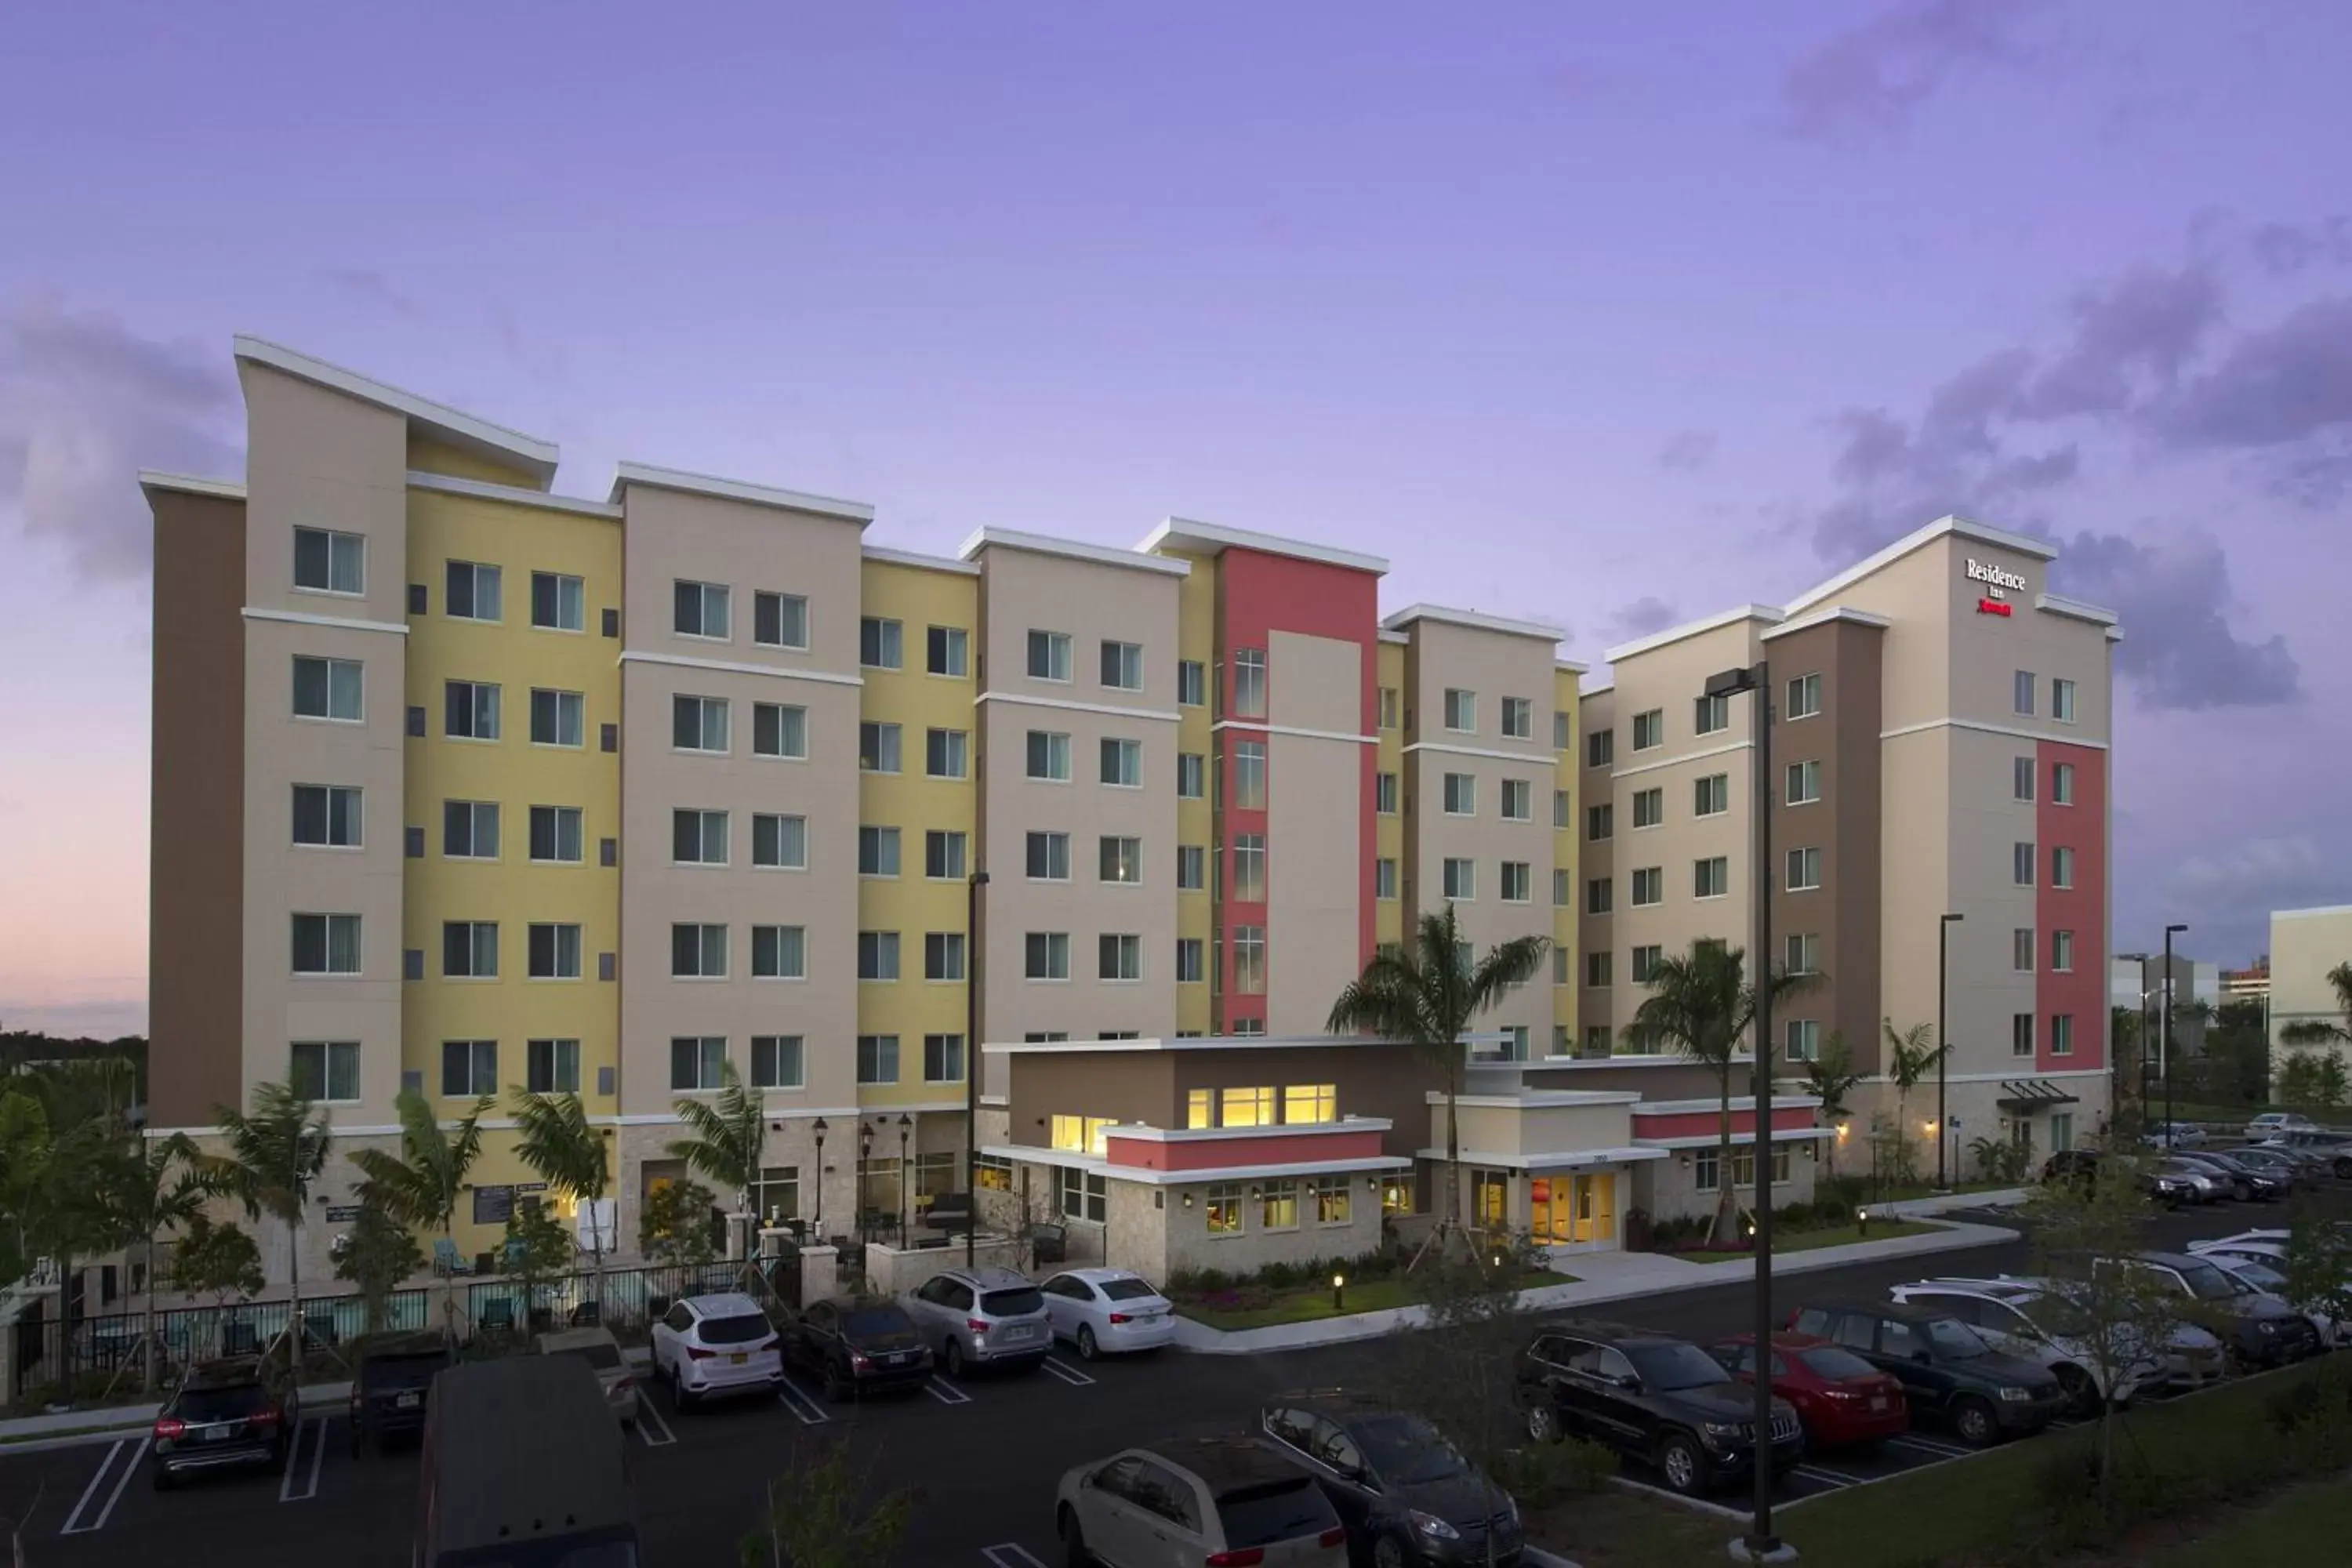 Property Building in Residence Inn by Marriott Miami Airport West/Doral